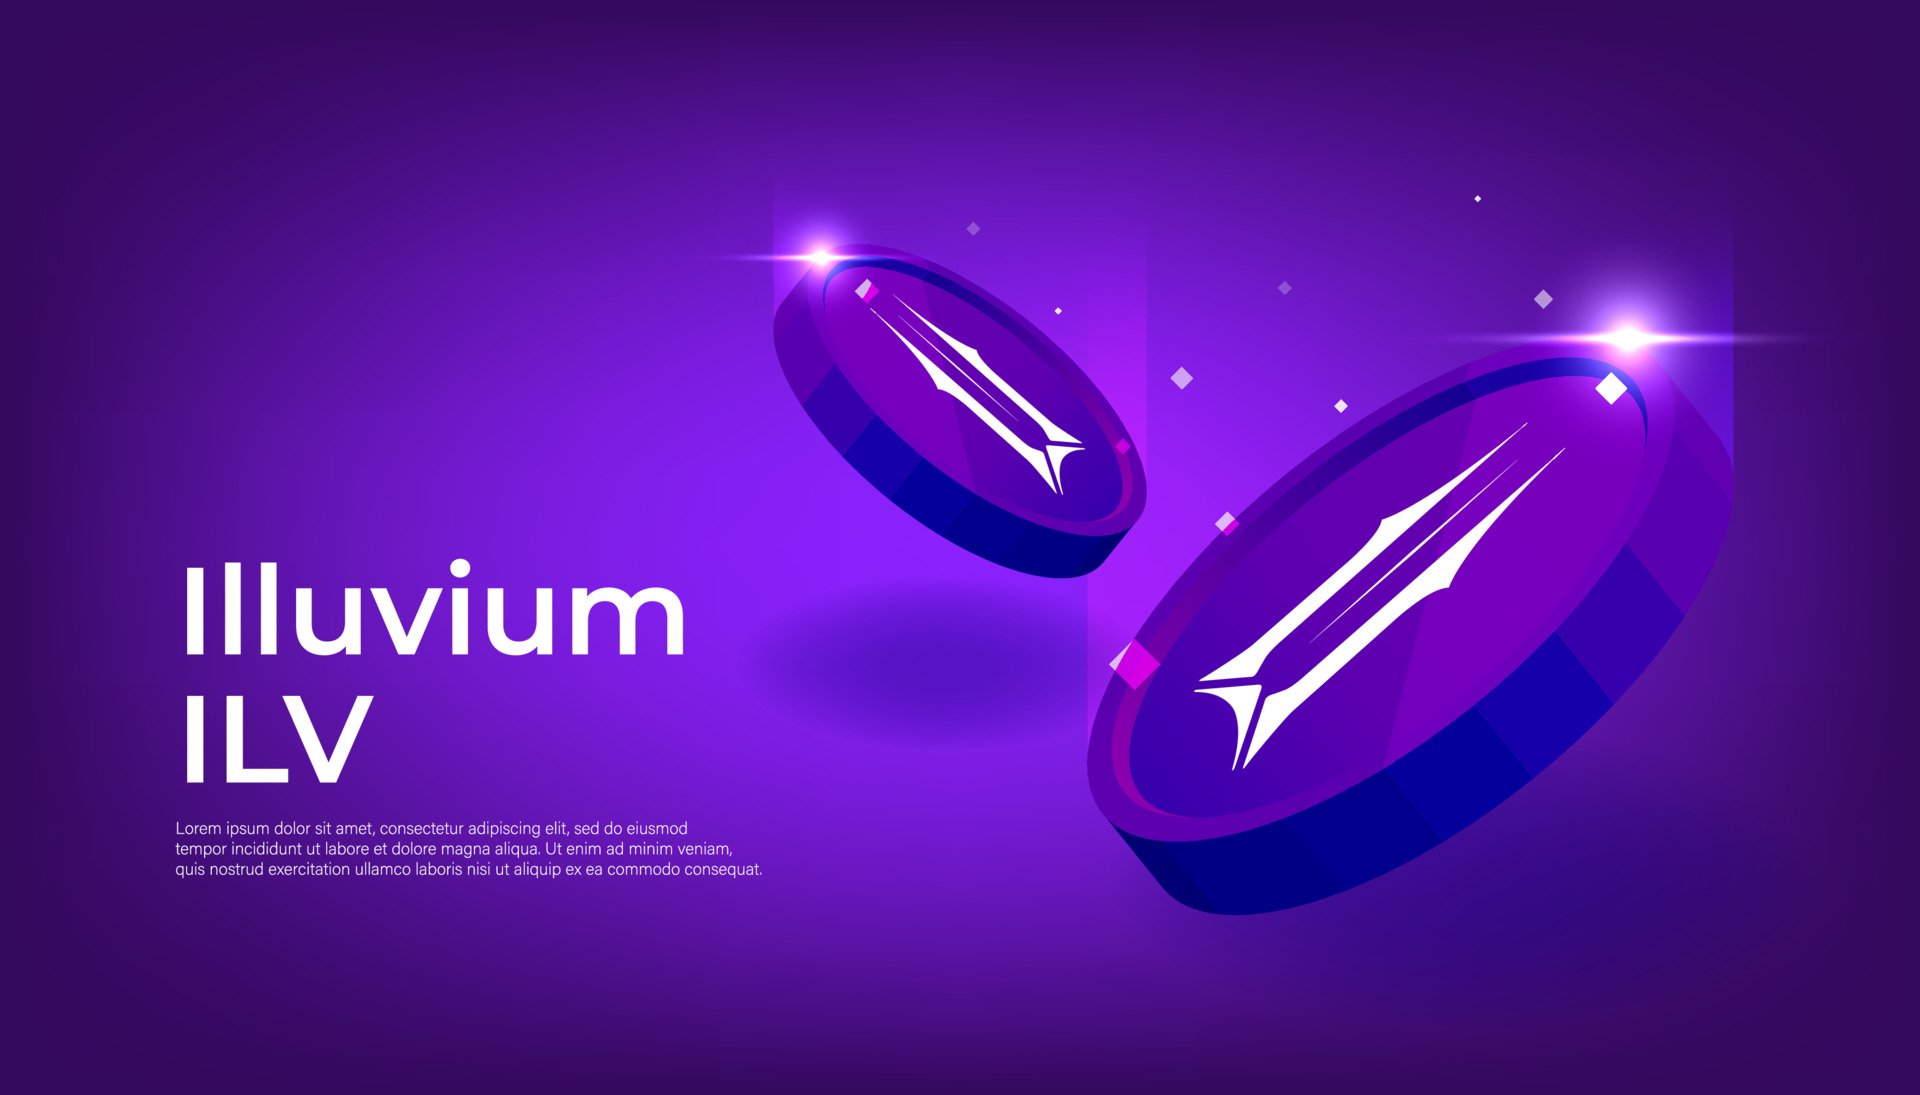 Illuvium: Everything you need to know - TechStory